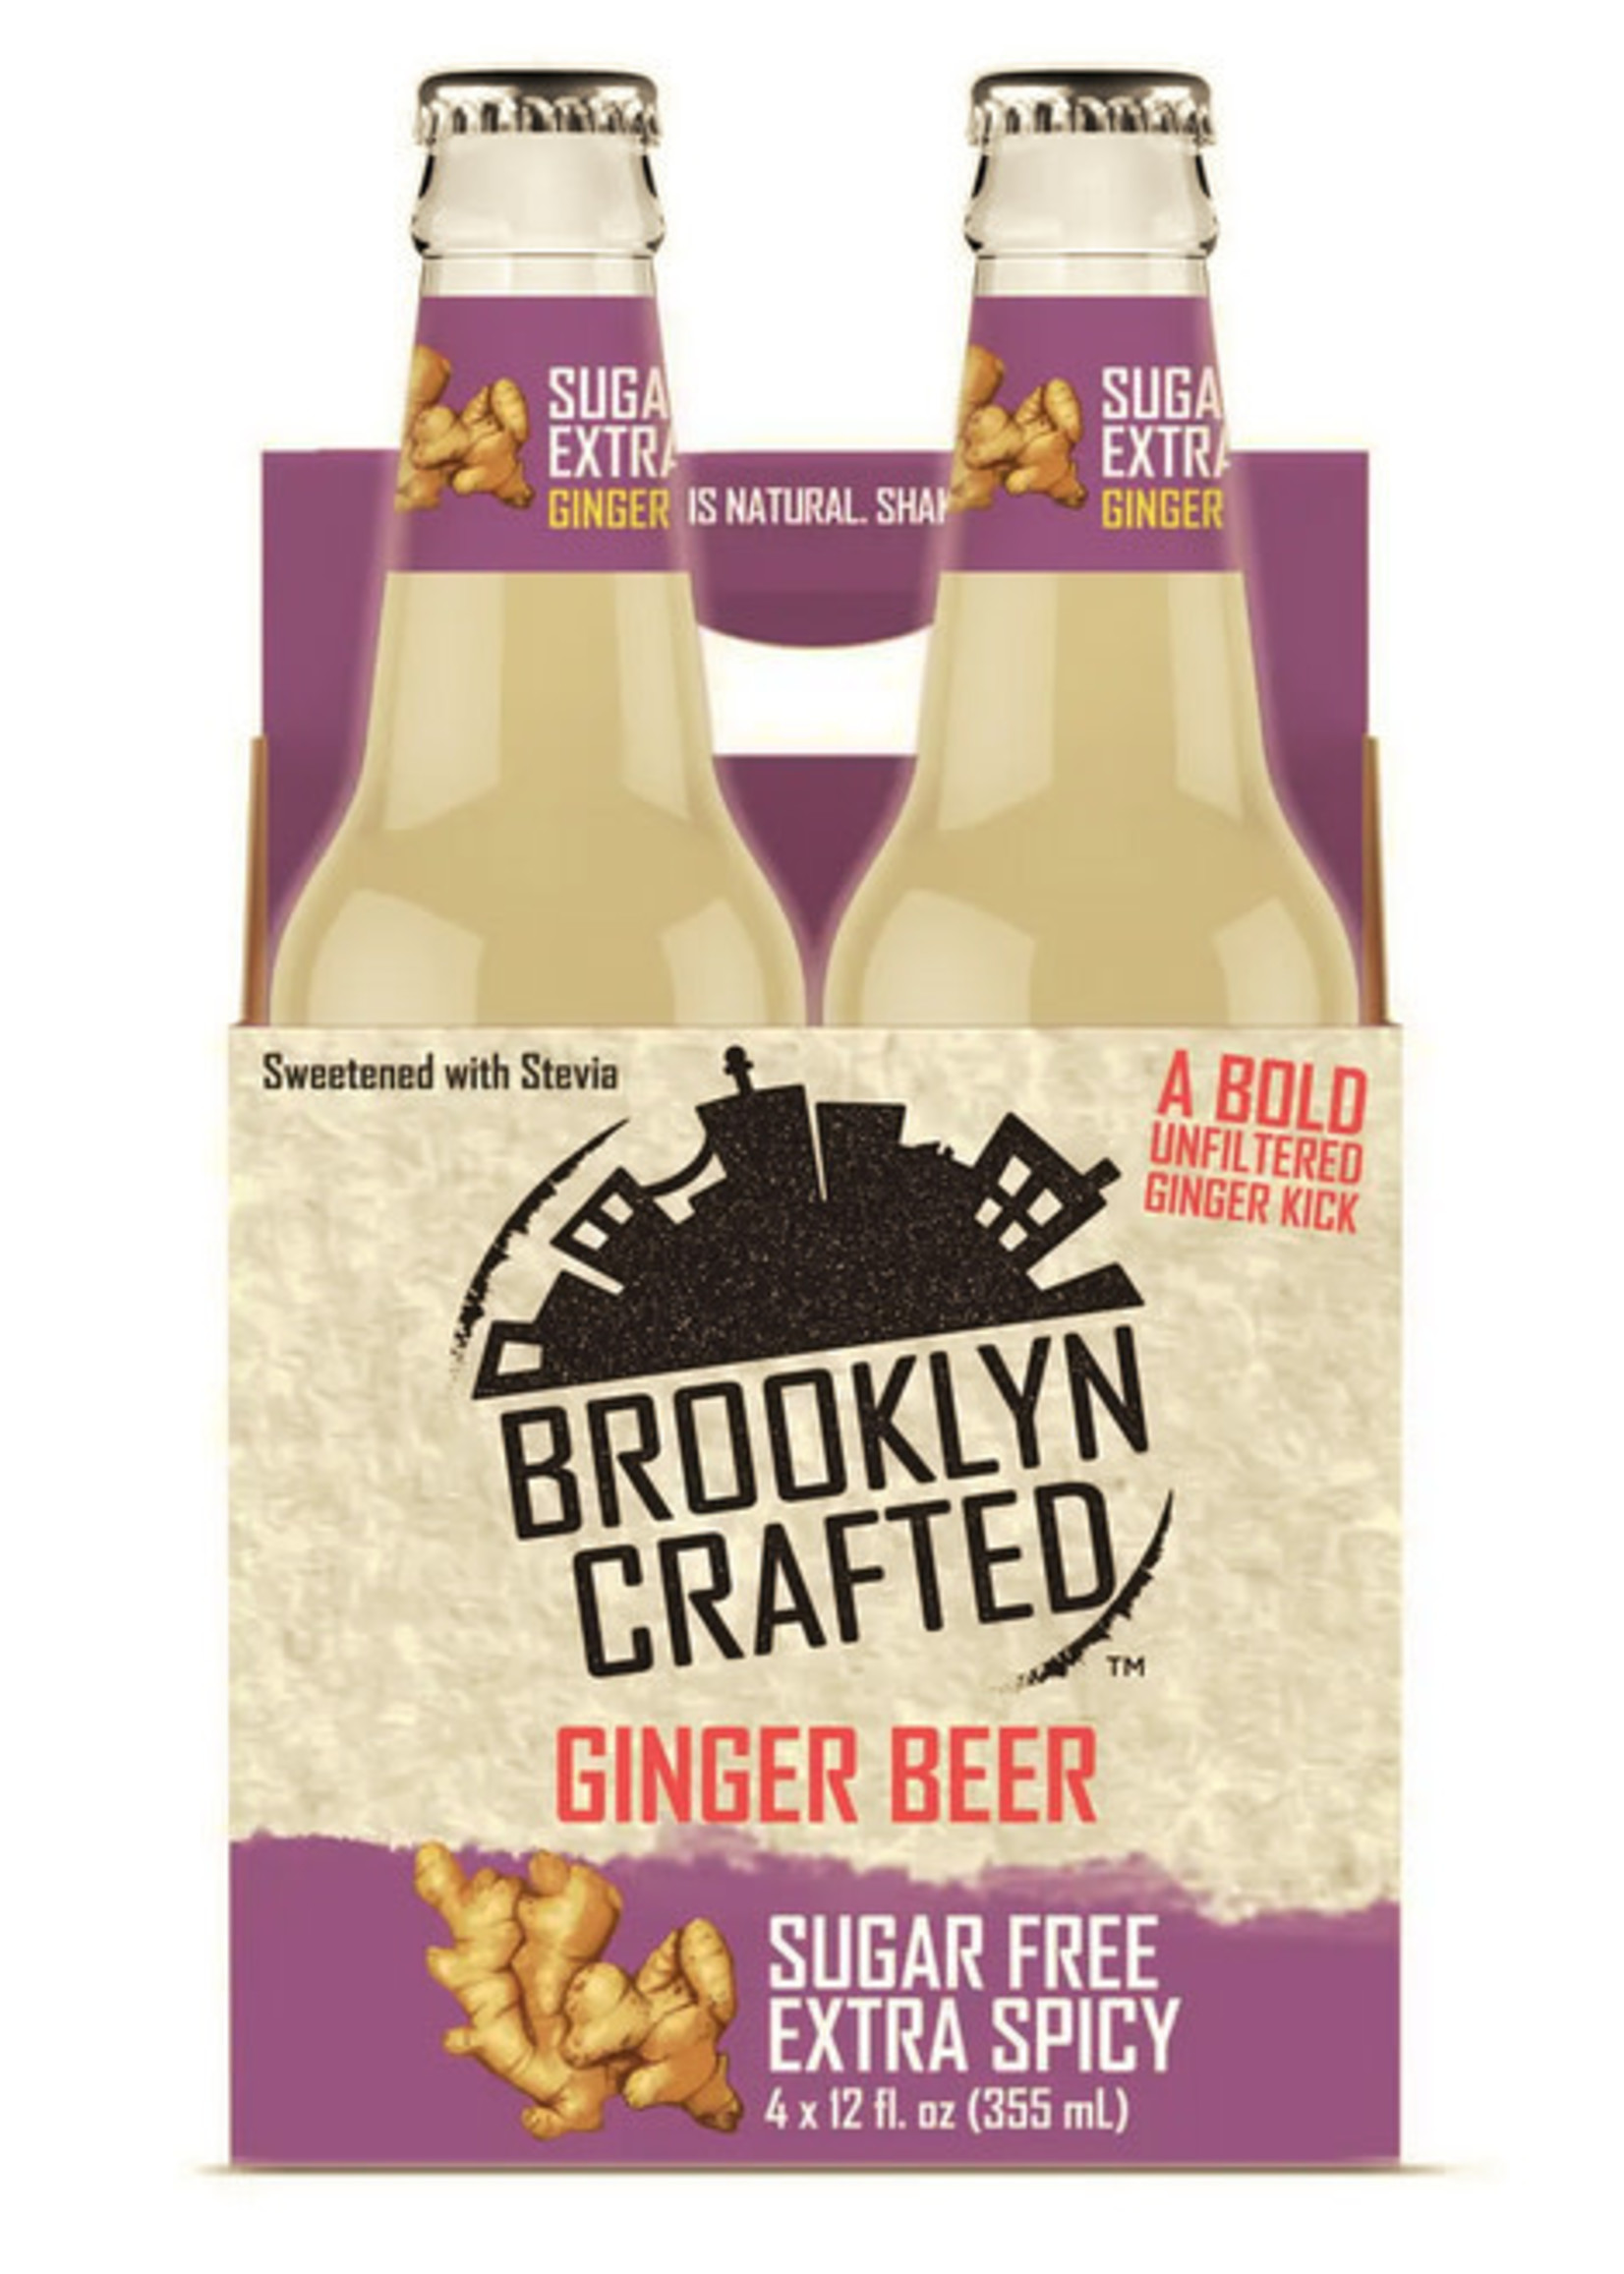 Brooklyn Crafted Brooklyn Crafted, Ginger Beer, Sugar-Free Extra Spicy, 4 pack